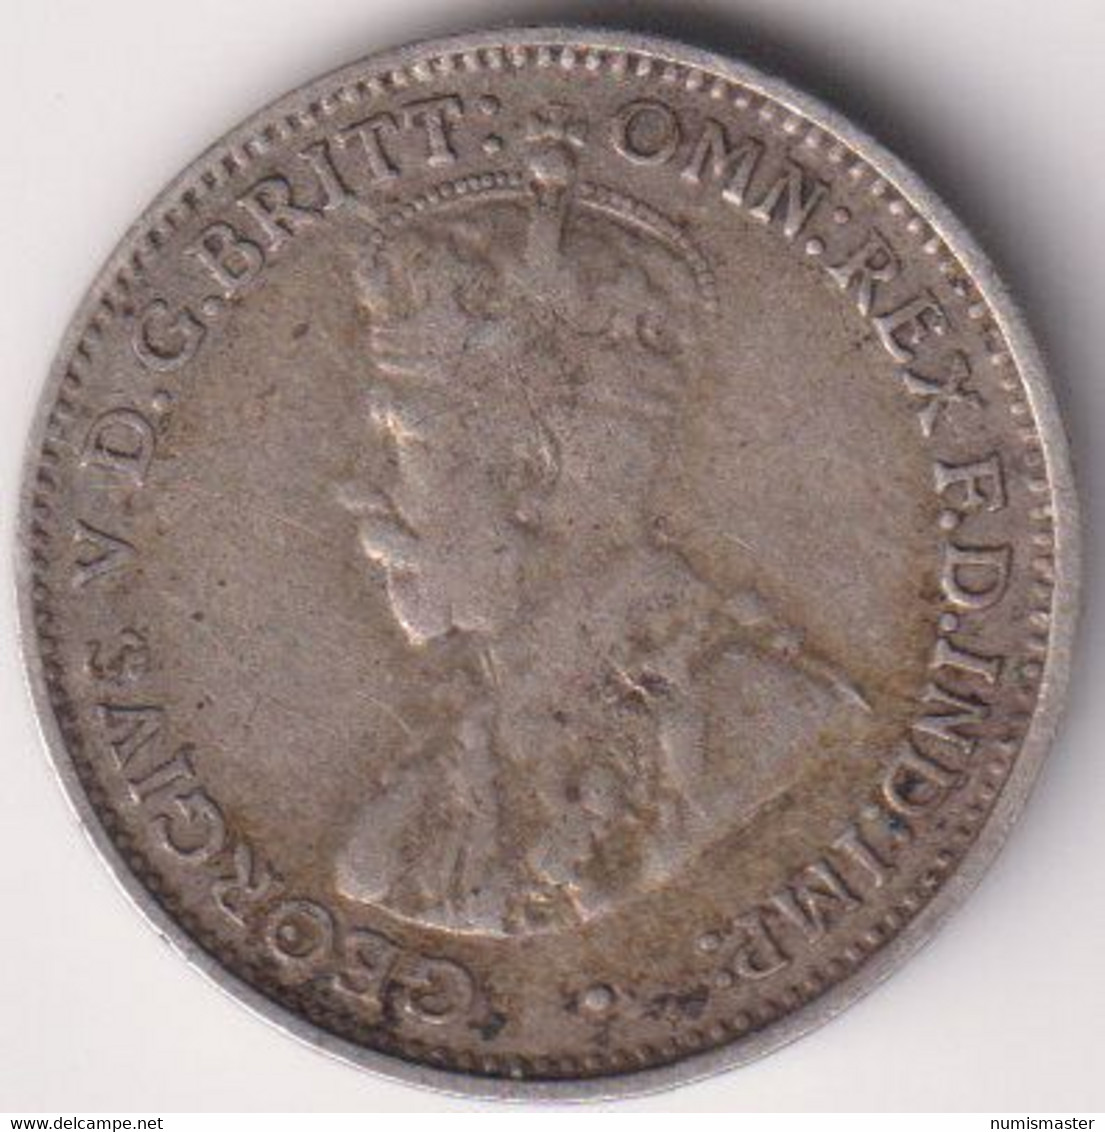 AUSTRALIA , THREEPENCE 1935 , UNCLEANED SILVER COIN - Threepence